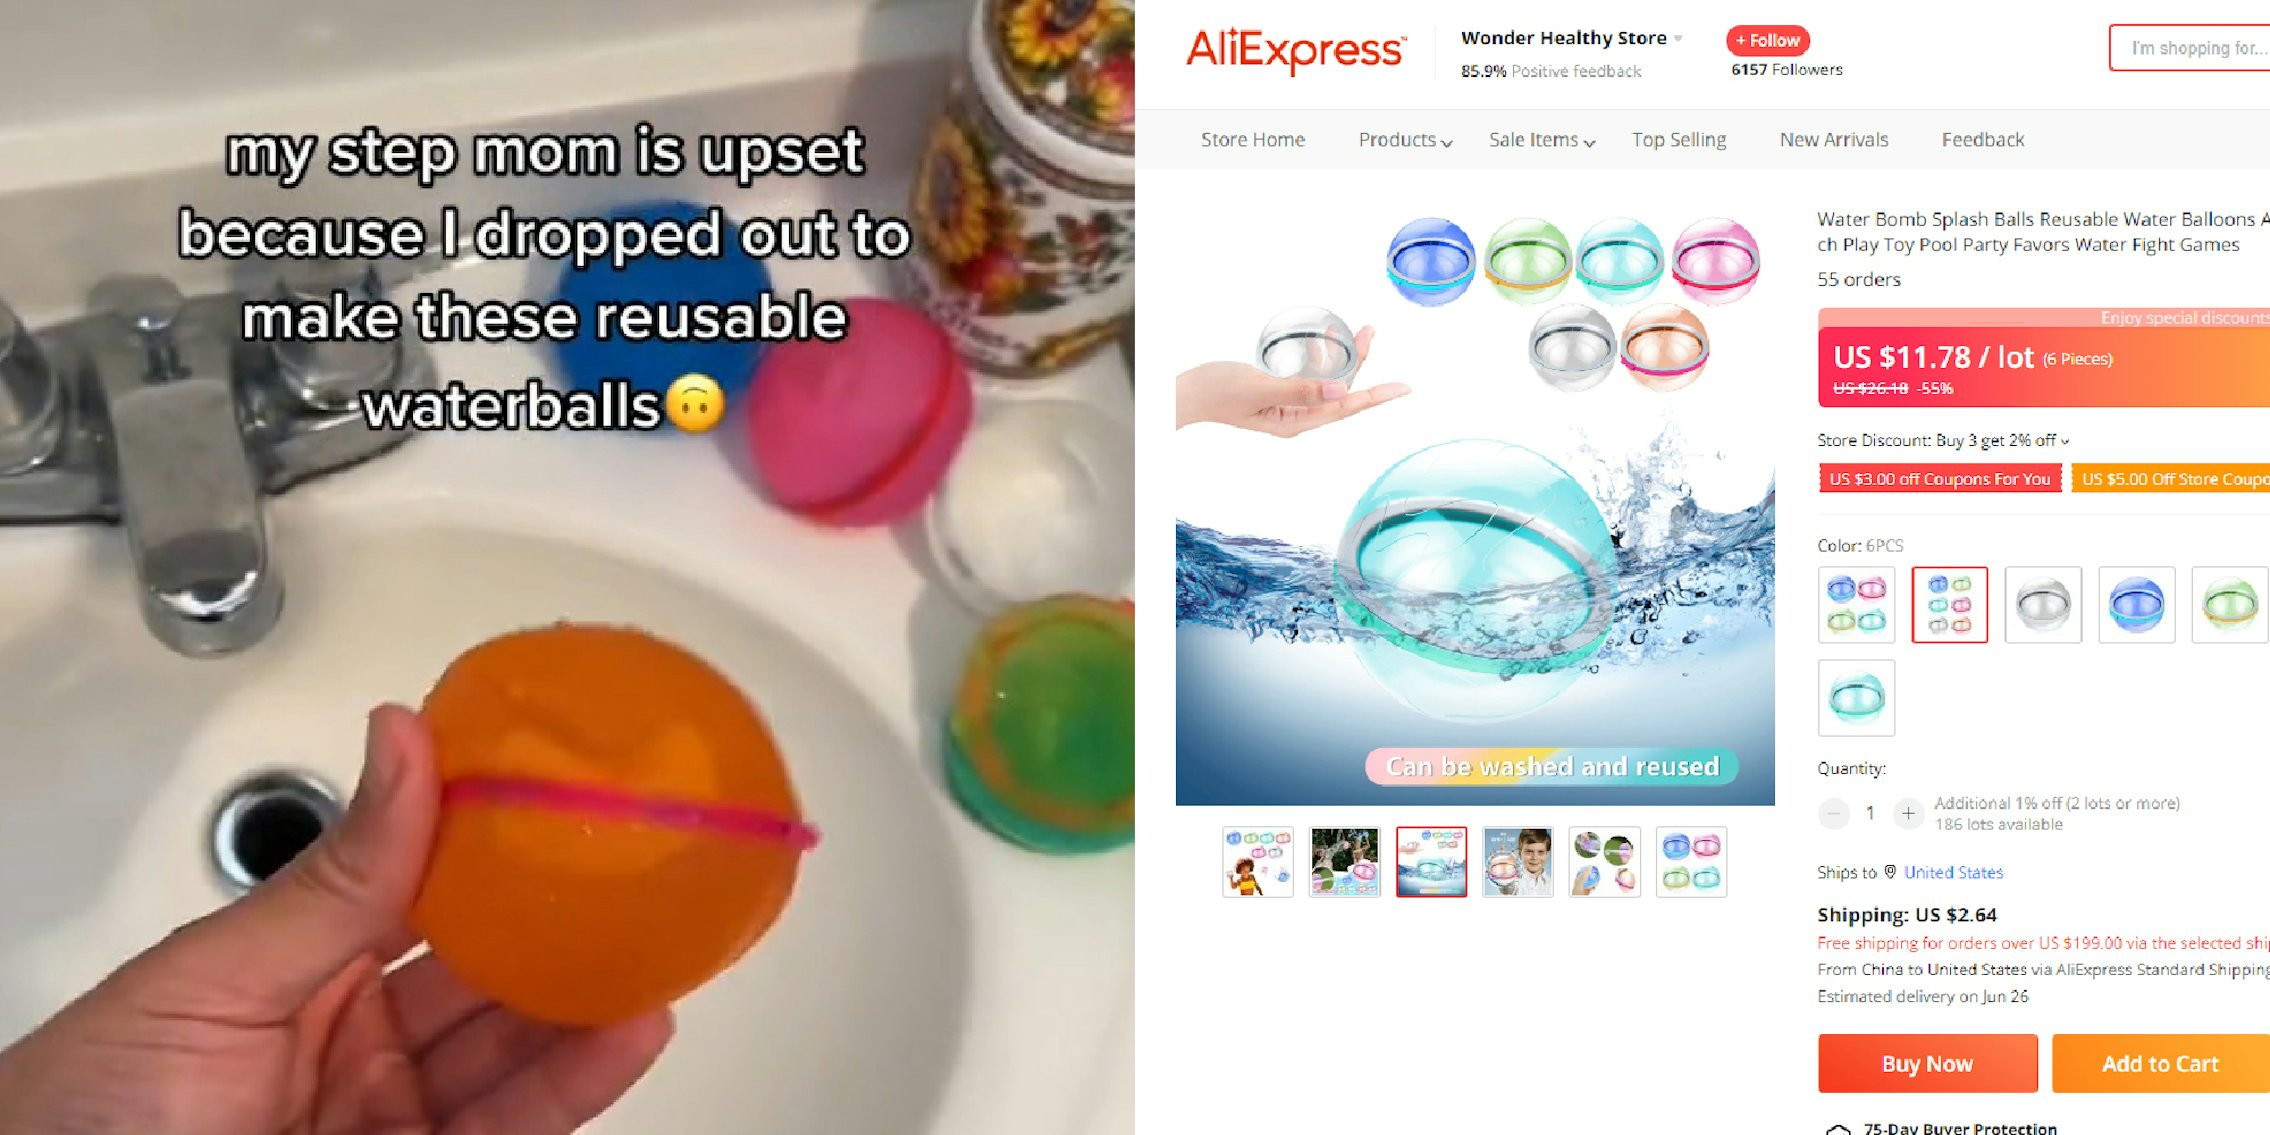 hand holding plastic ball in sink with caption 'my step mom is upset because I dropped out to make these reusable waterballs' (l) water bomb splash balls reusable water balloons listing on AliExpress (r)